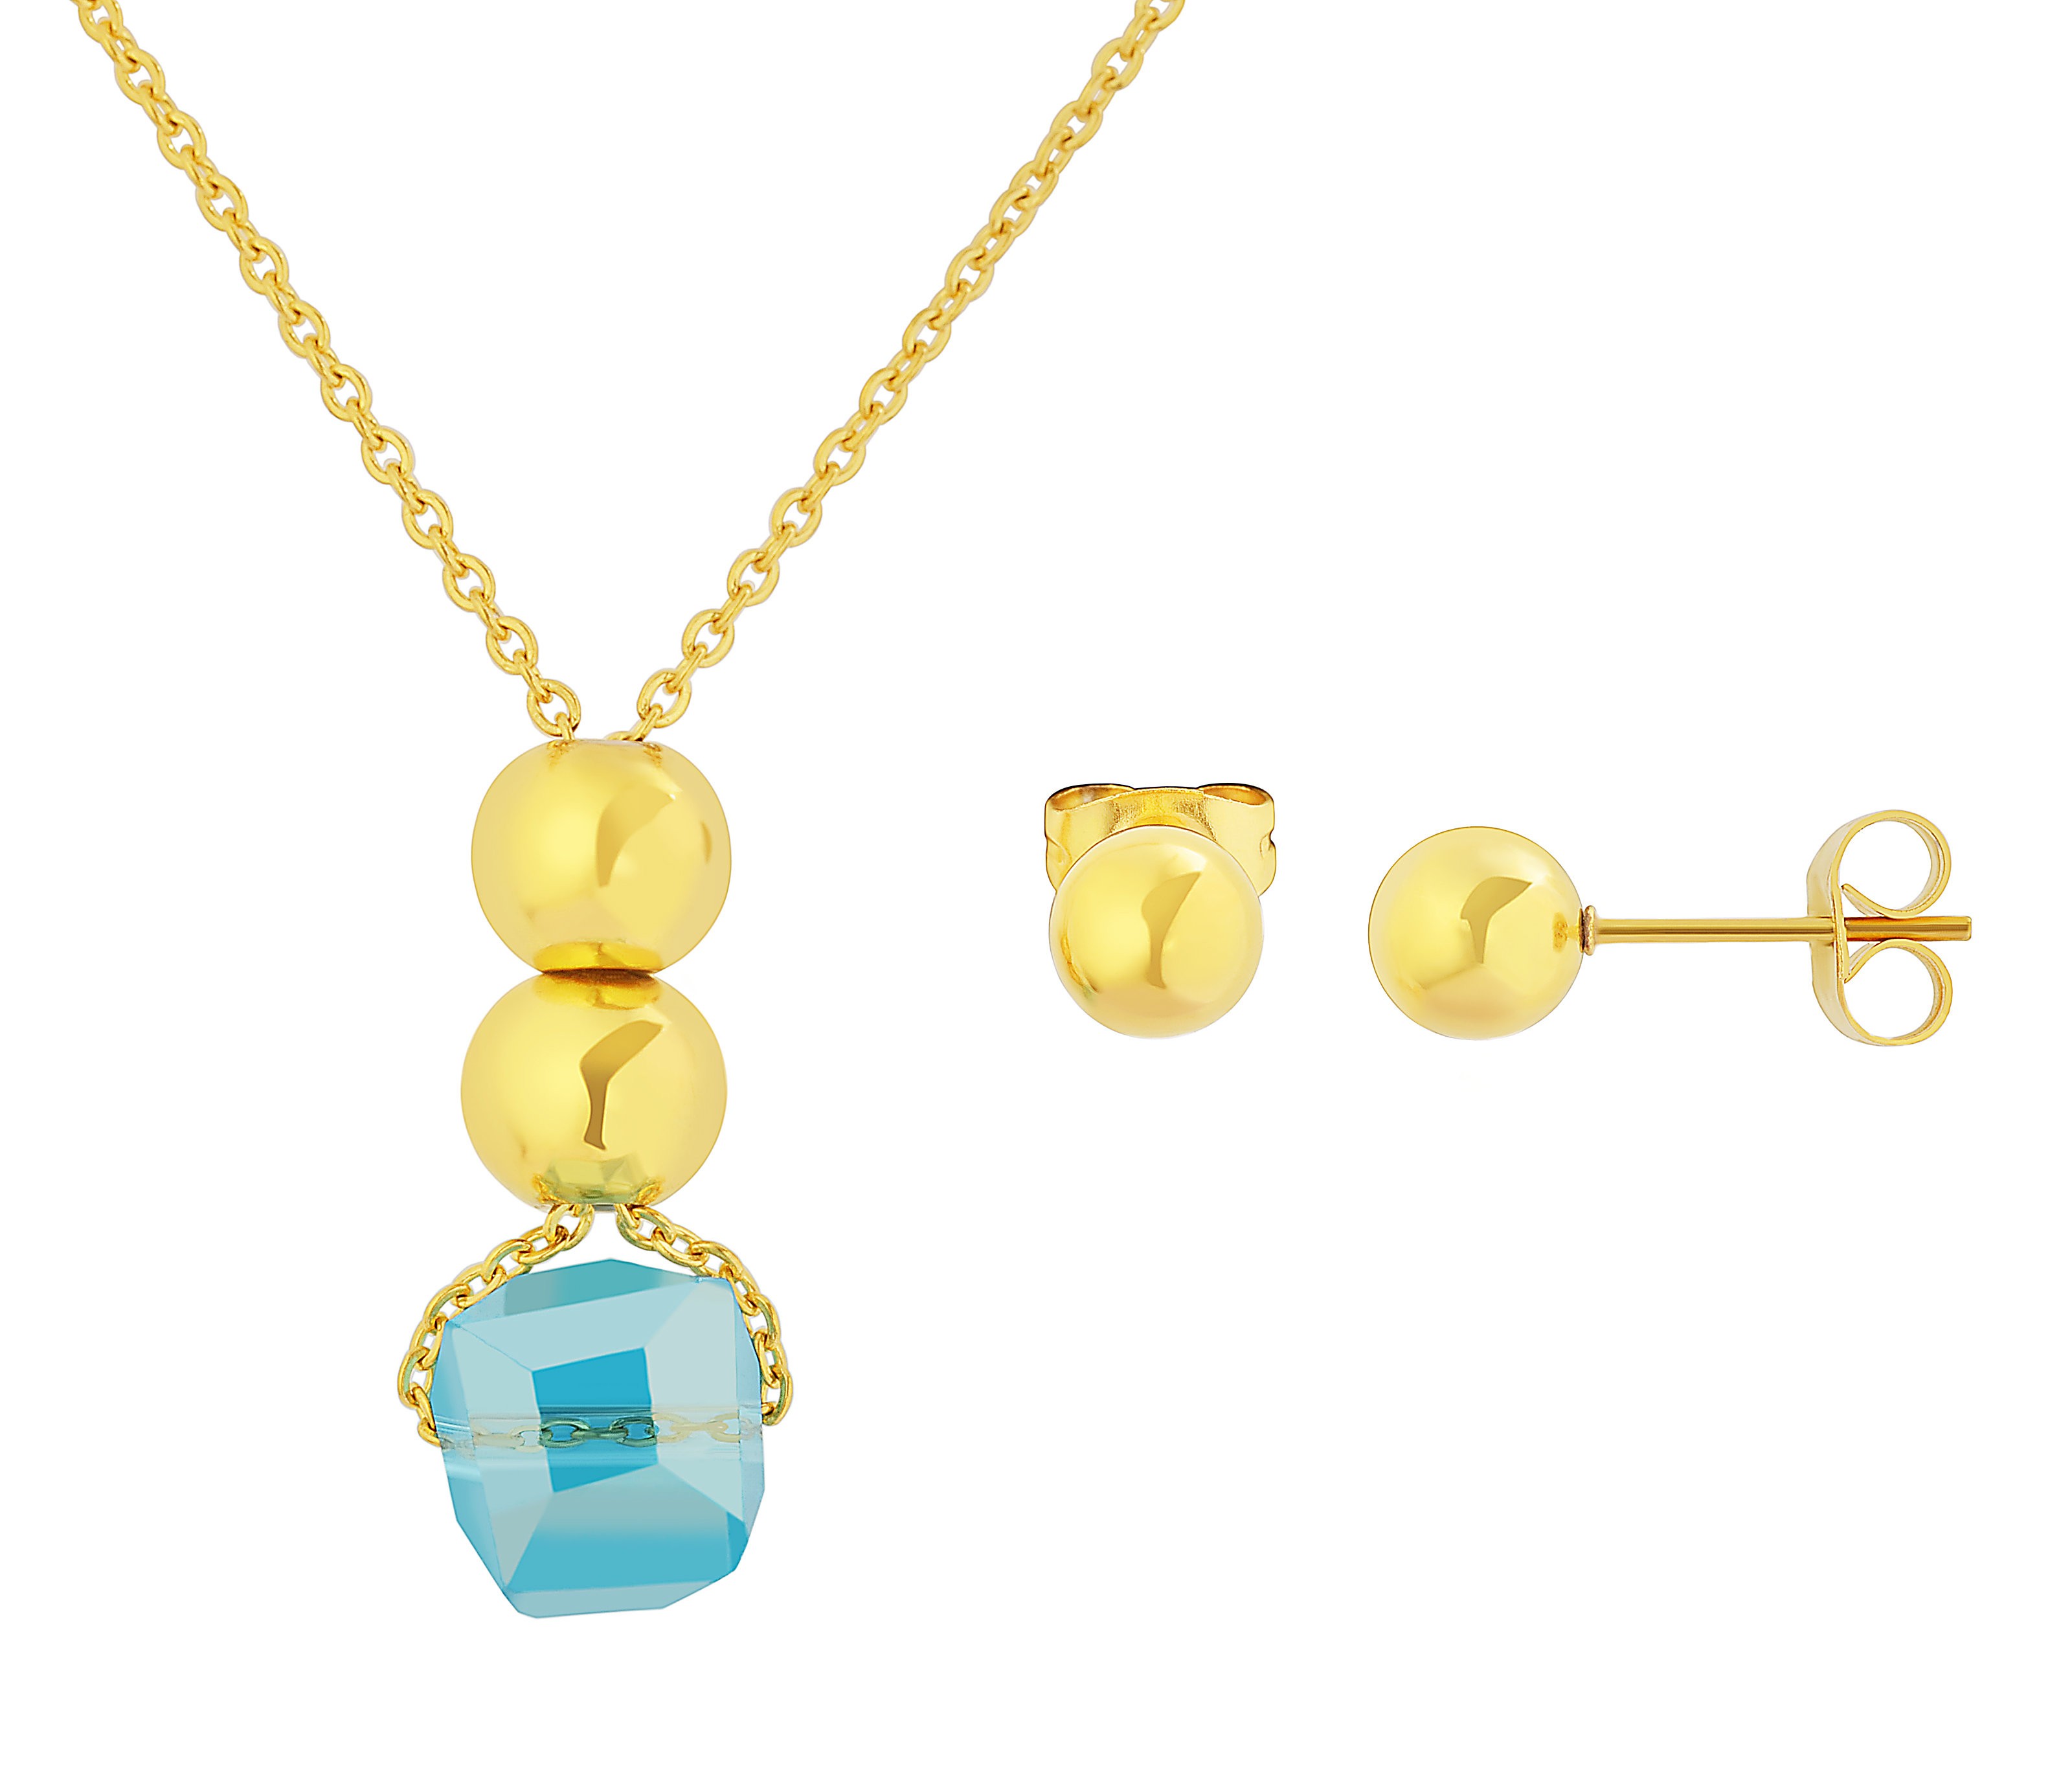 Stainless Steel Yellow Gold Tone Necklace & Earring Set With Golden Ball & Blue Glass